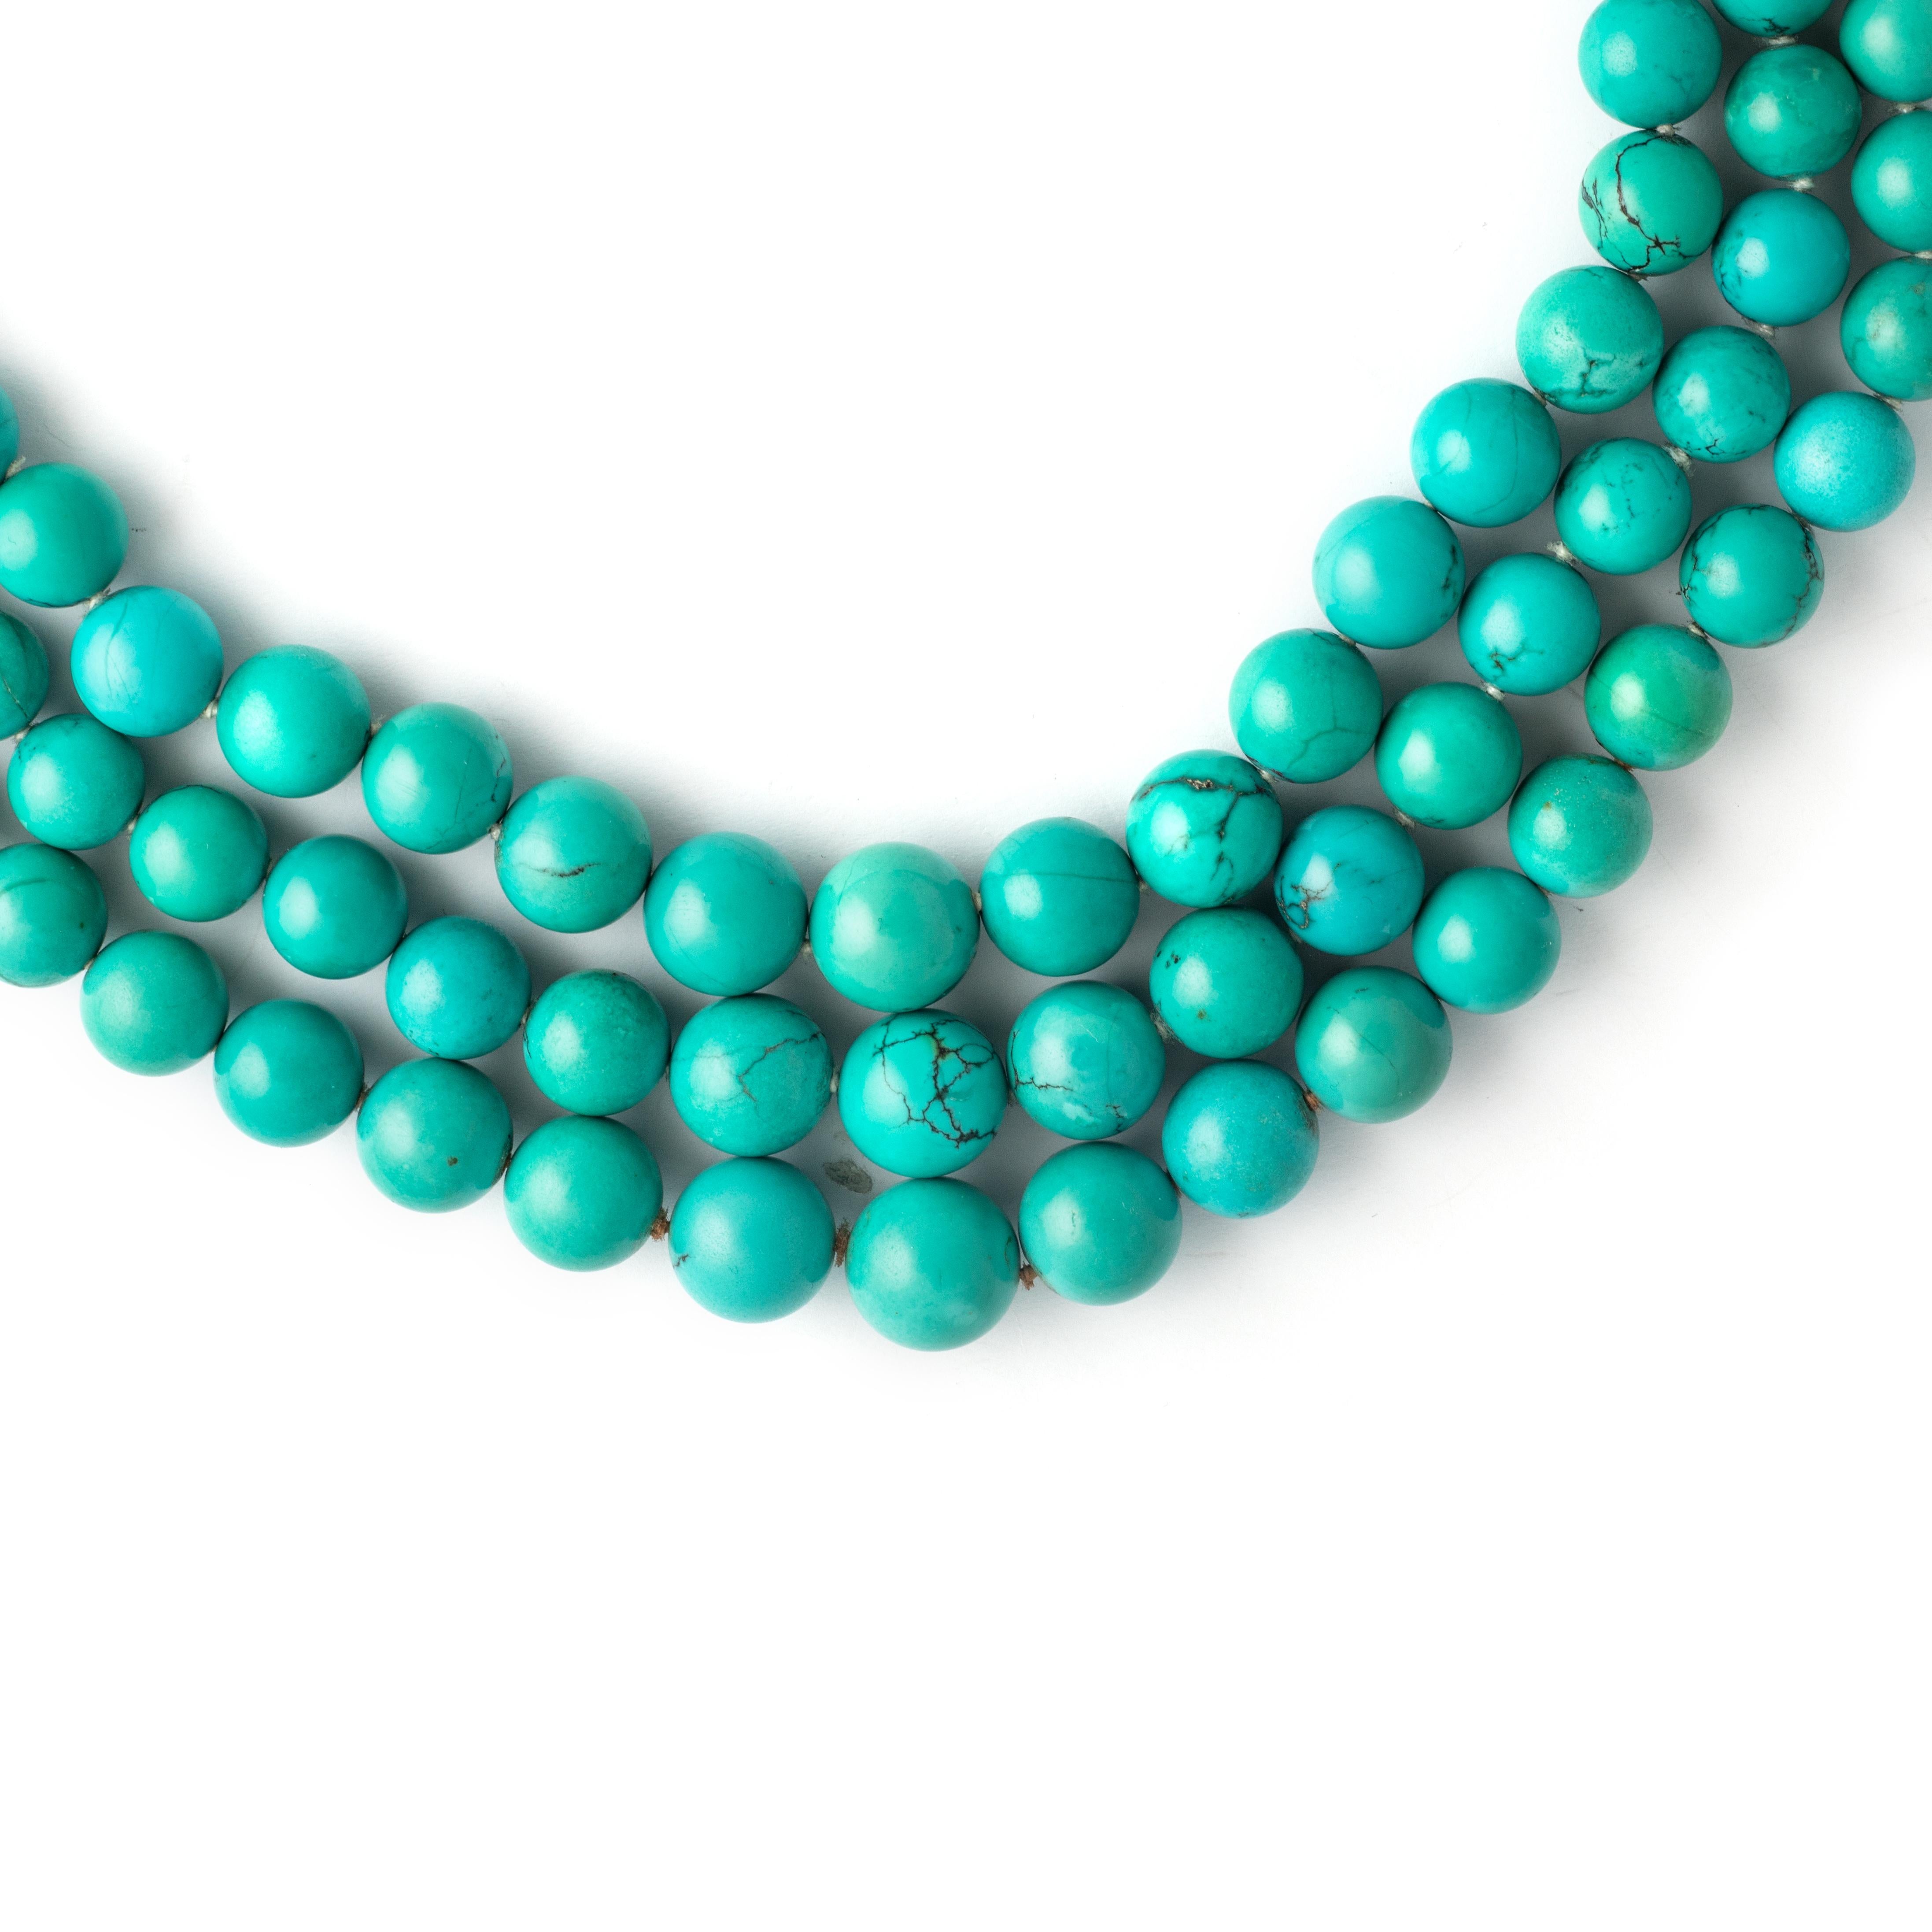 Natural Turquoise Necklace.
Clasp in diamond and white gold.

Total length: approx. 50.00 centimeters up to approx. 60.00 centimeters.
Total weight: 308.80 grams.
